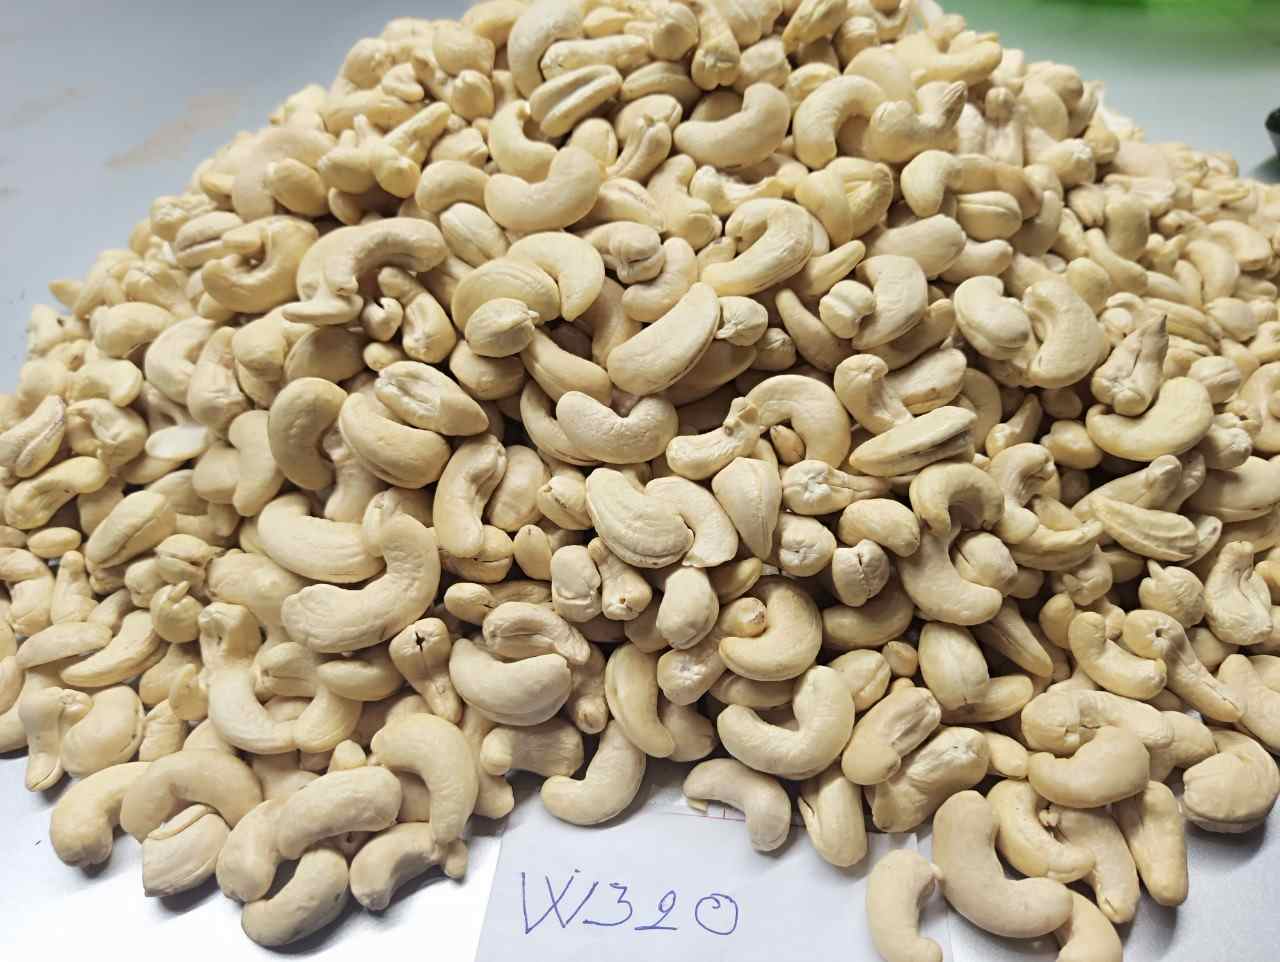 Cashew Nut Kernels themselves aren’t toxic - W320 Cashew nut Kernel From Vietnam - Raw Image